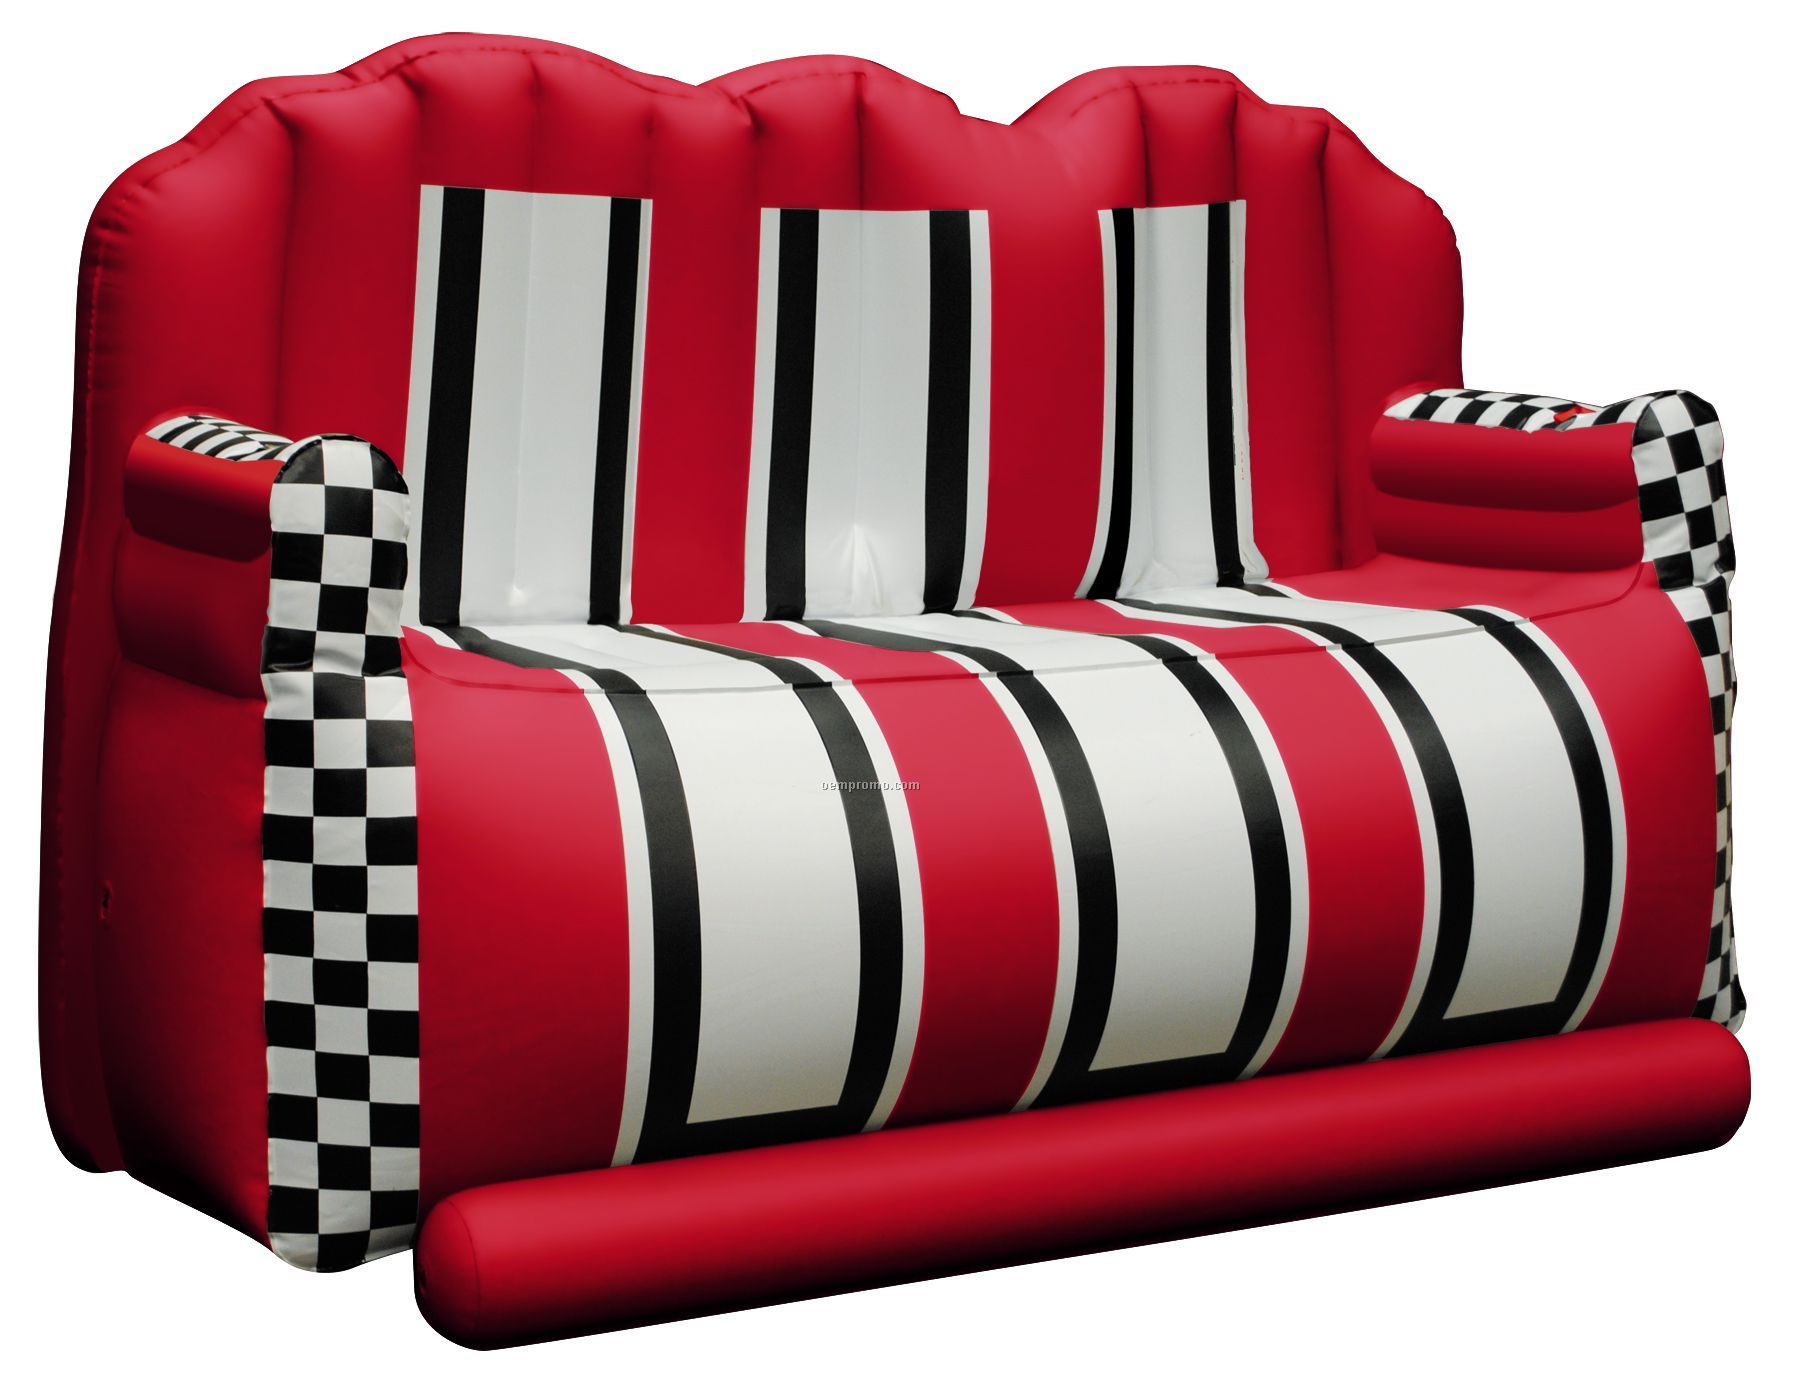 Inflate-a-seat "Couch": Red/White/Black With Checkered Arms